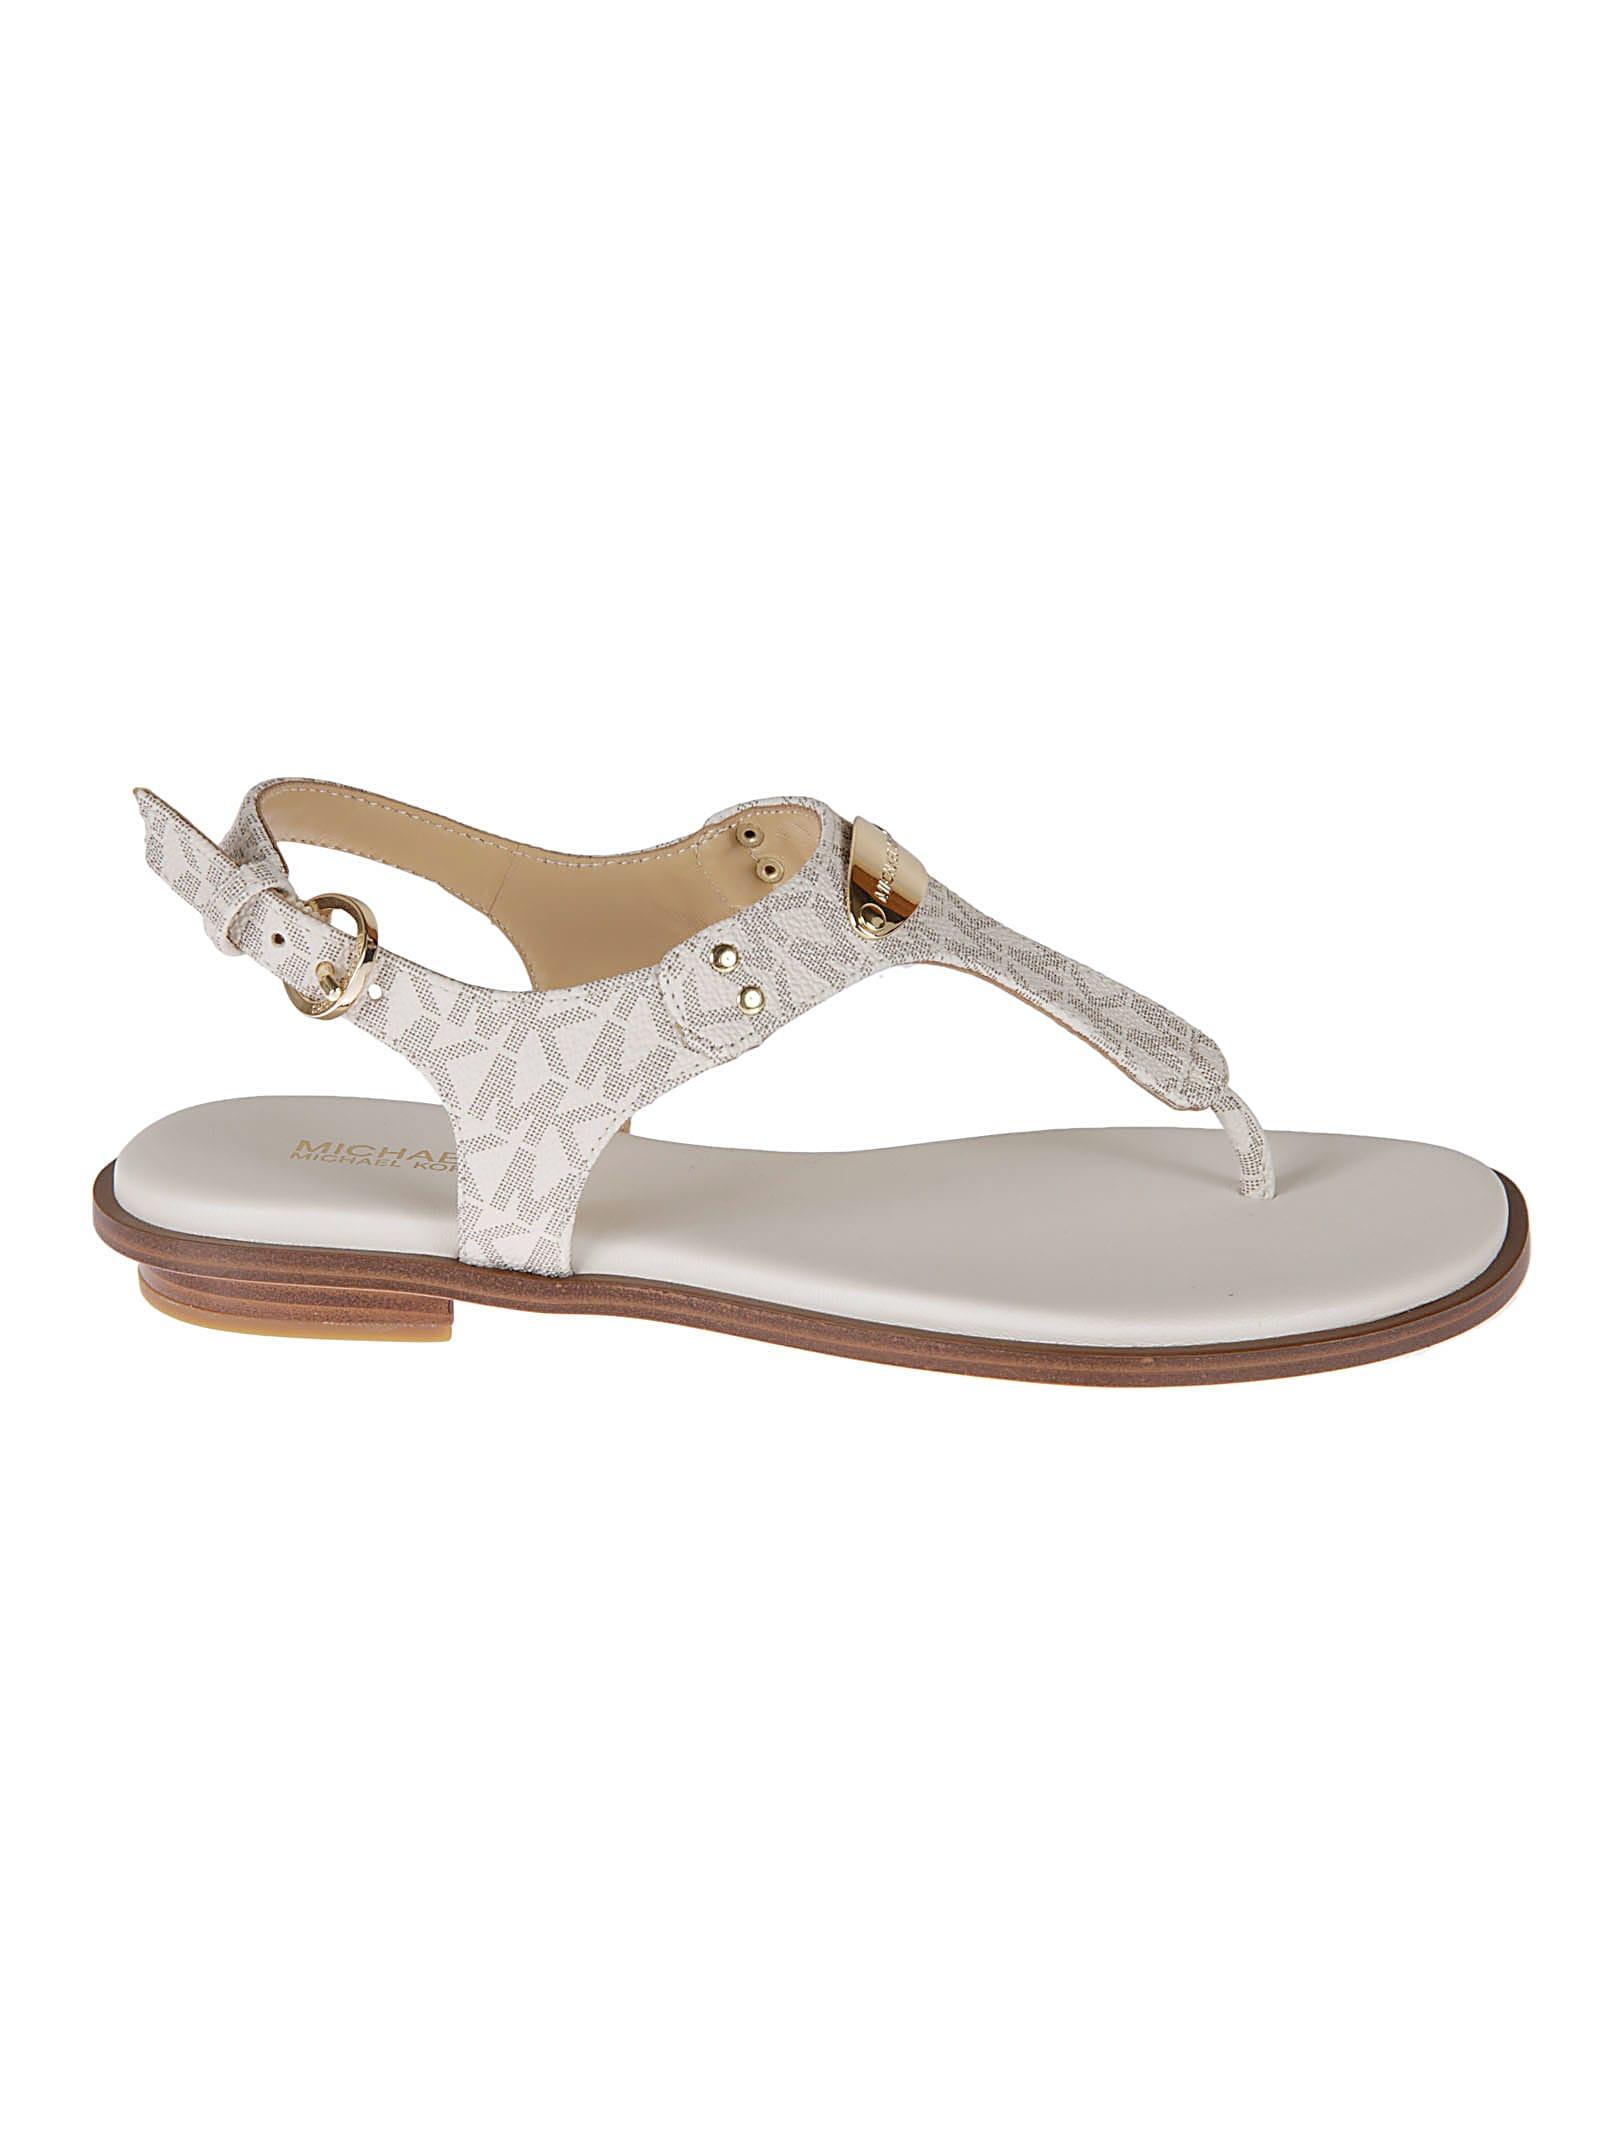 Michael Kors Mk Plate Thong Sandals in White | Lyst